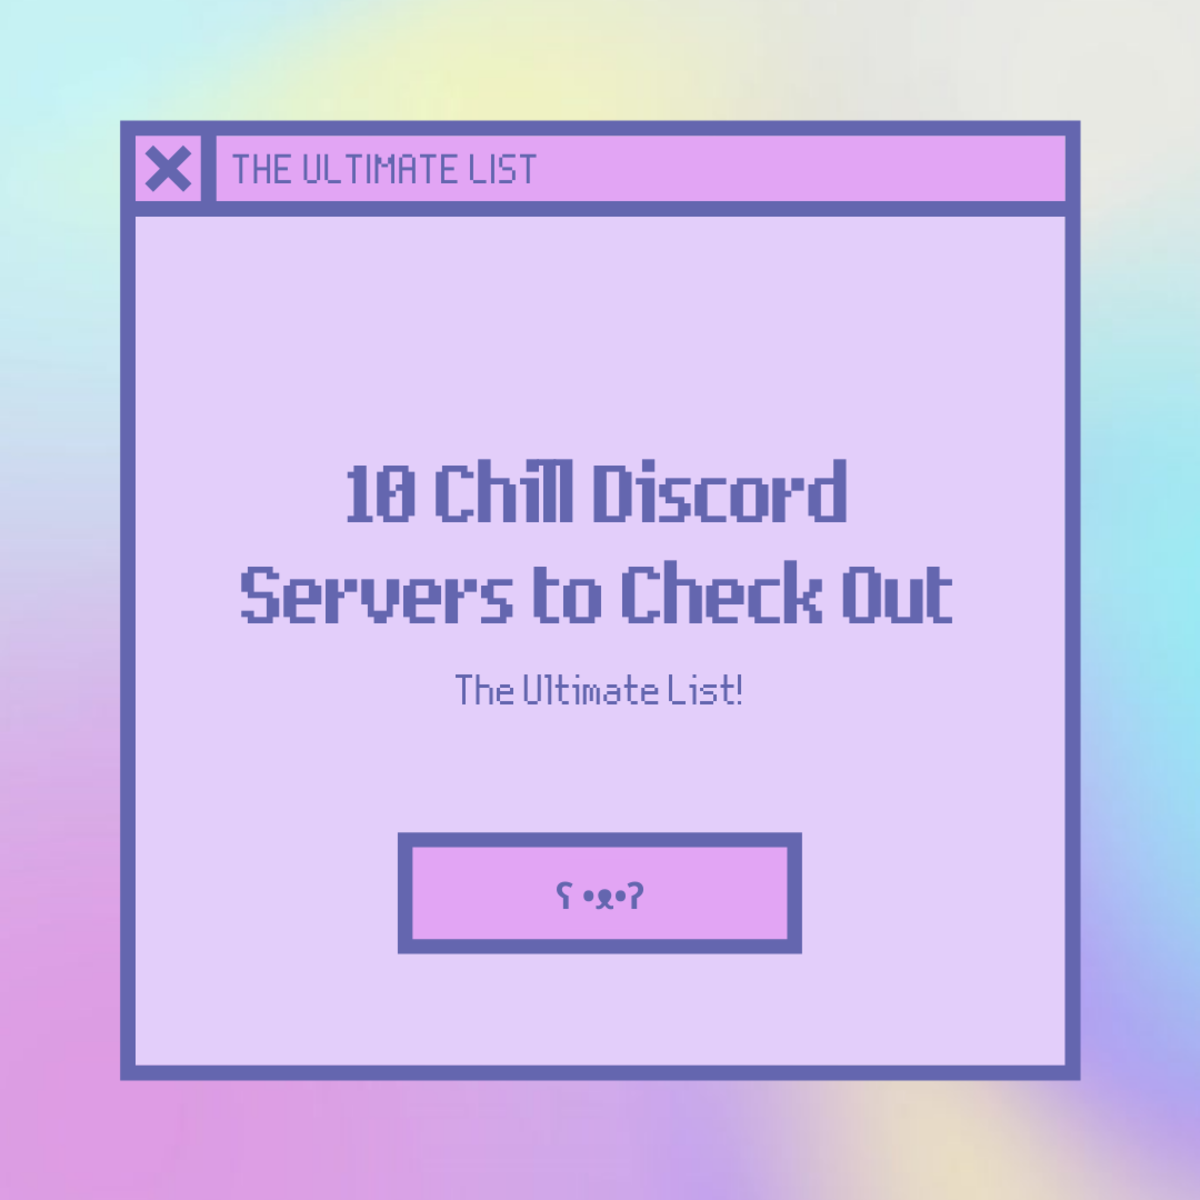 10 Chill Discord Servers to Check Out: The Ultimate List - TurboFuture